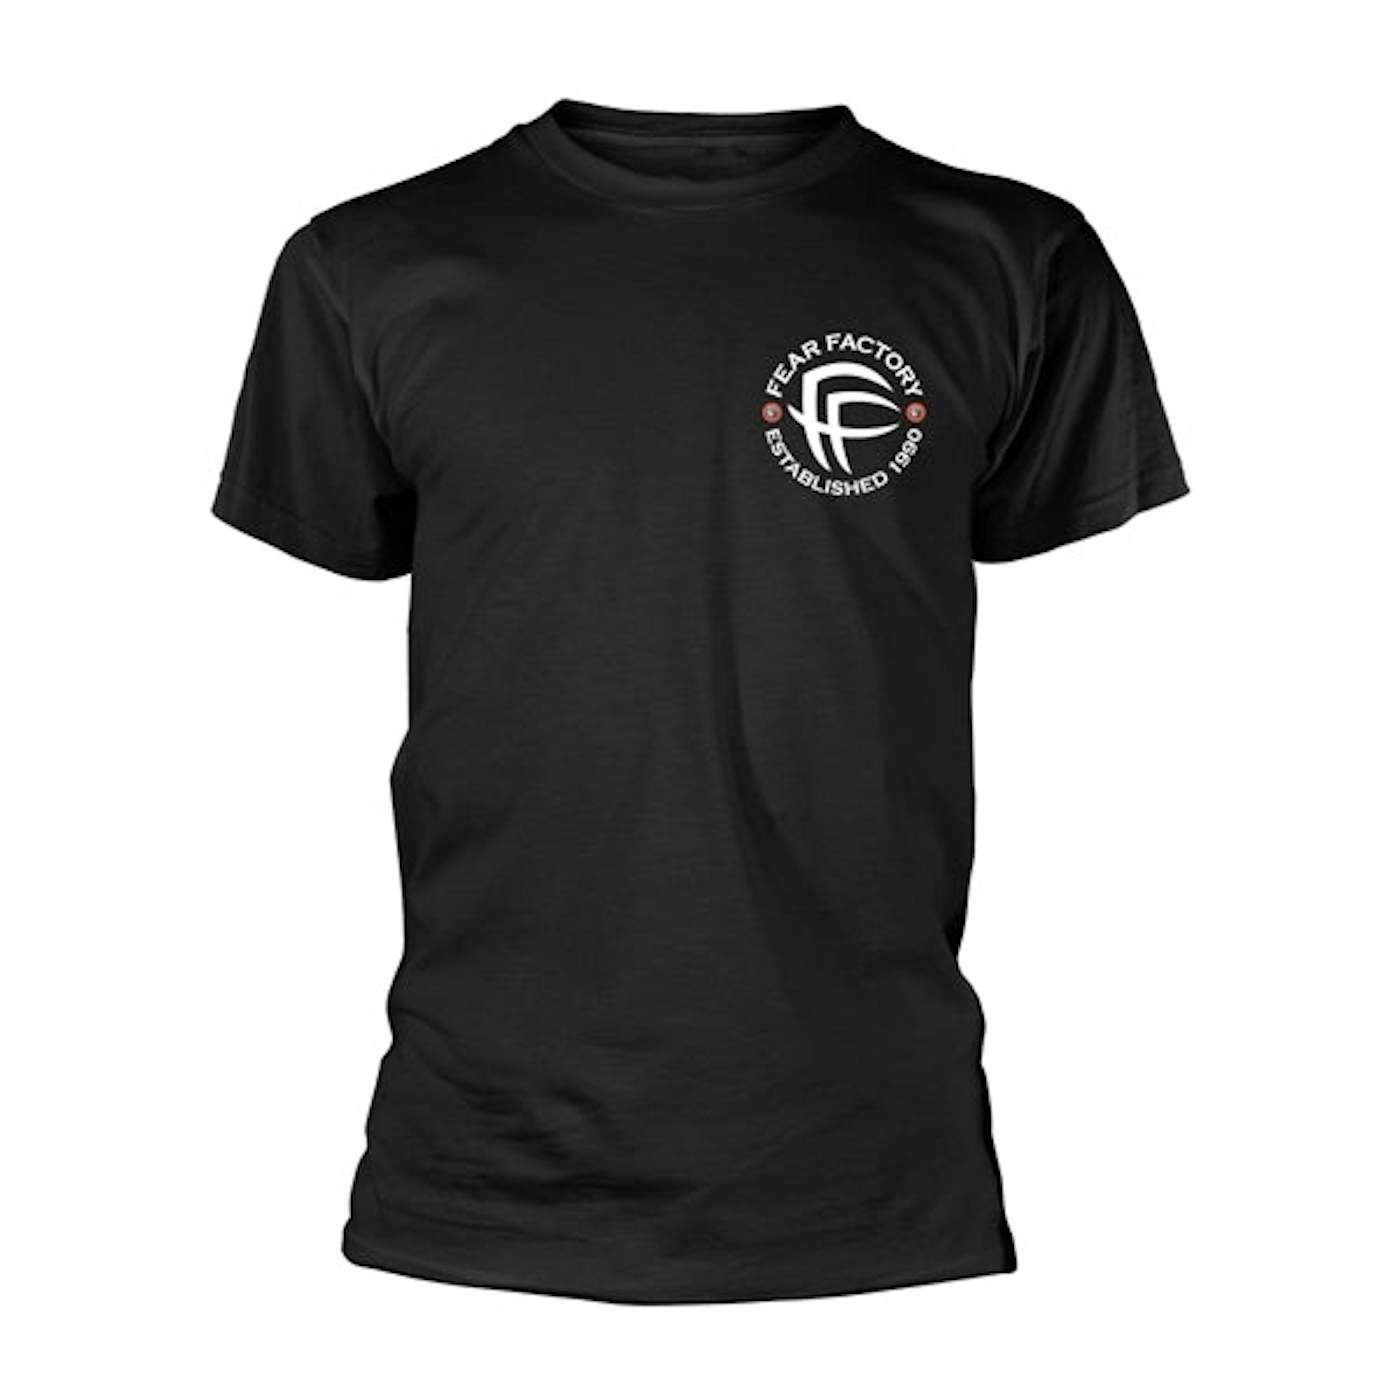 Fear Factory T-Shirt - 30 Years Of Fear